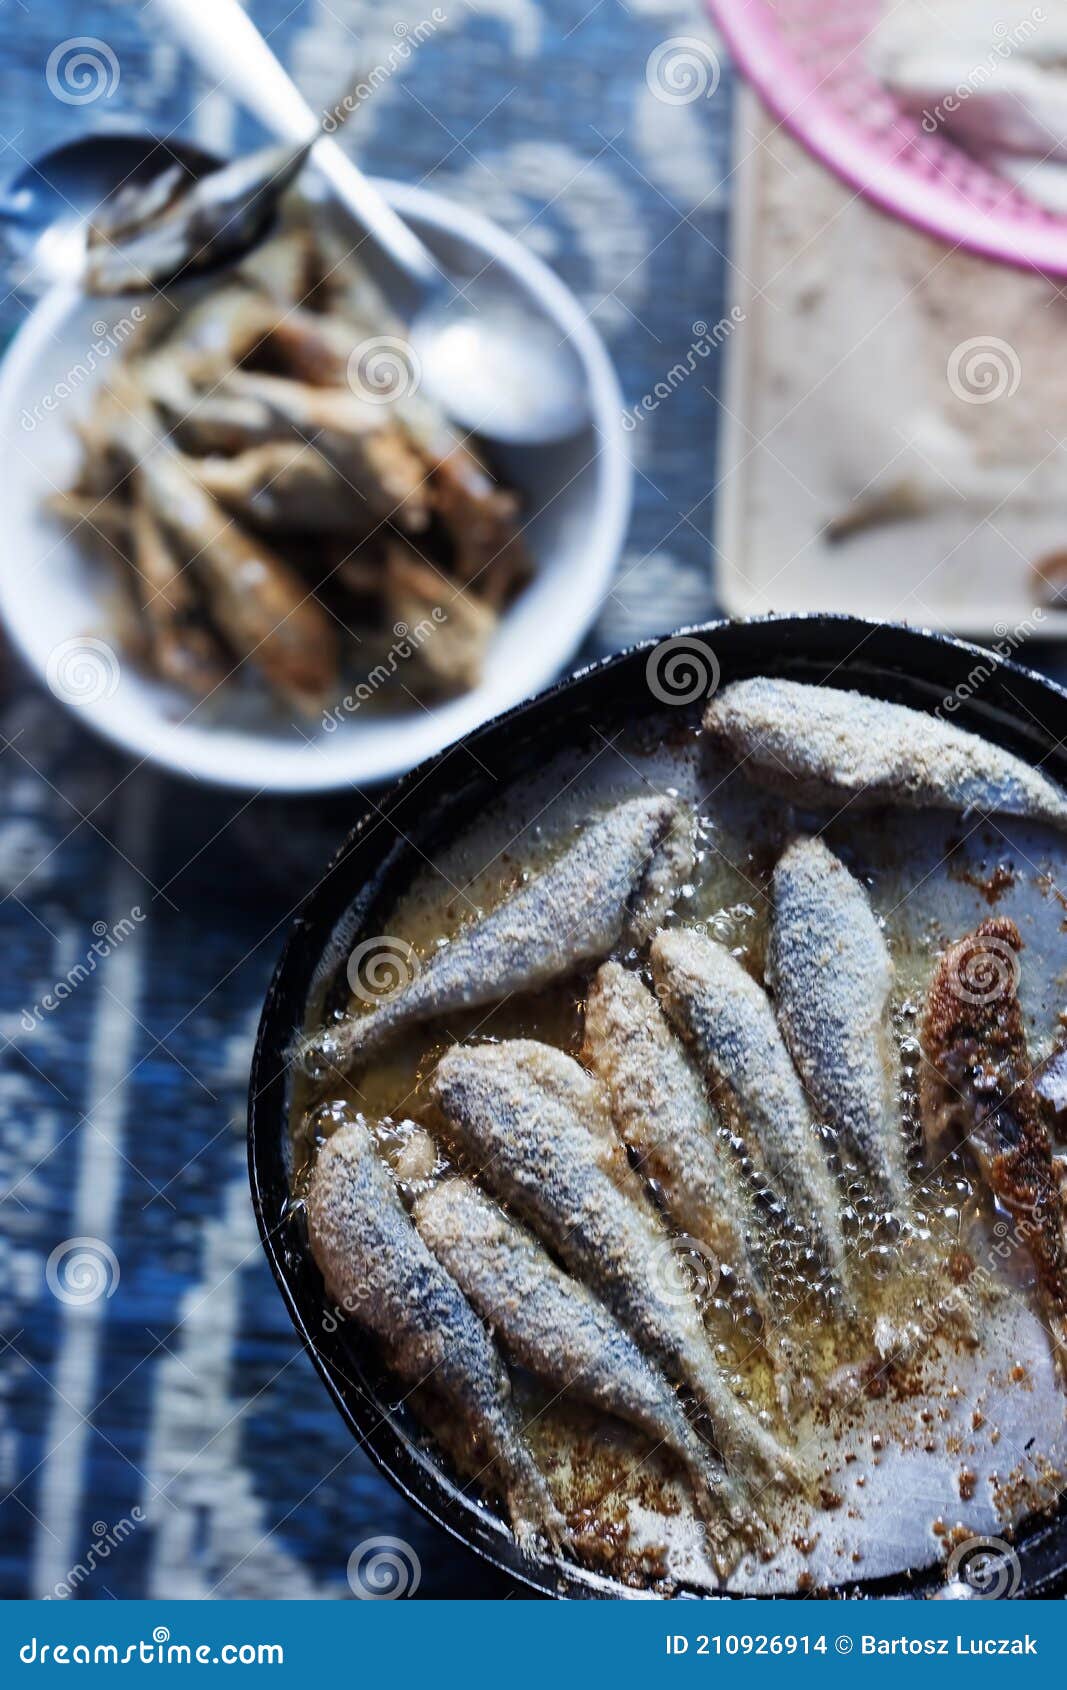 frying small sardines fish, chefchouen, morocco